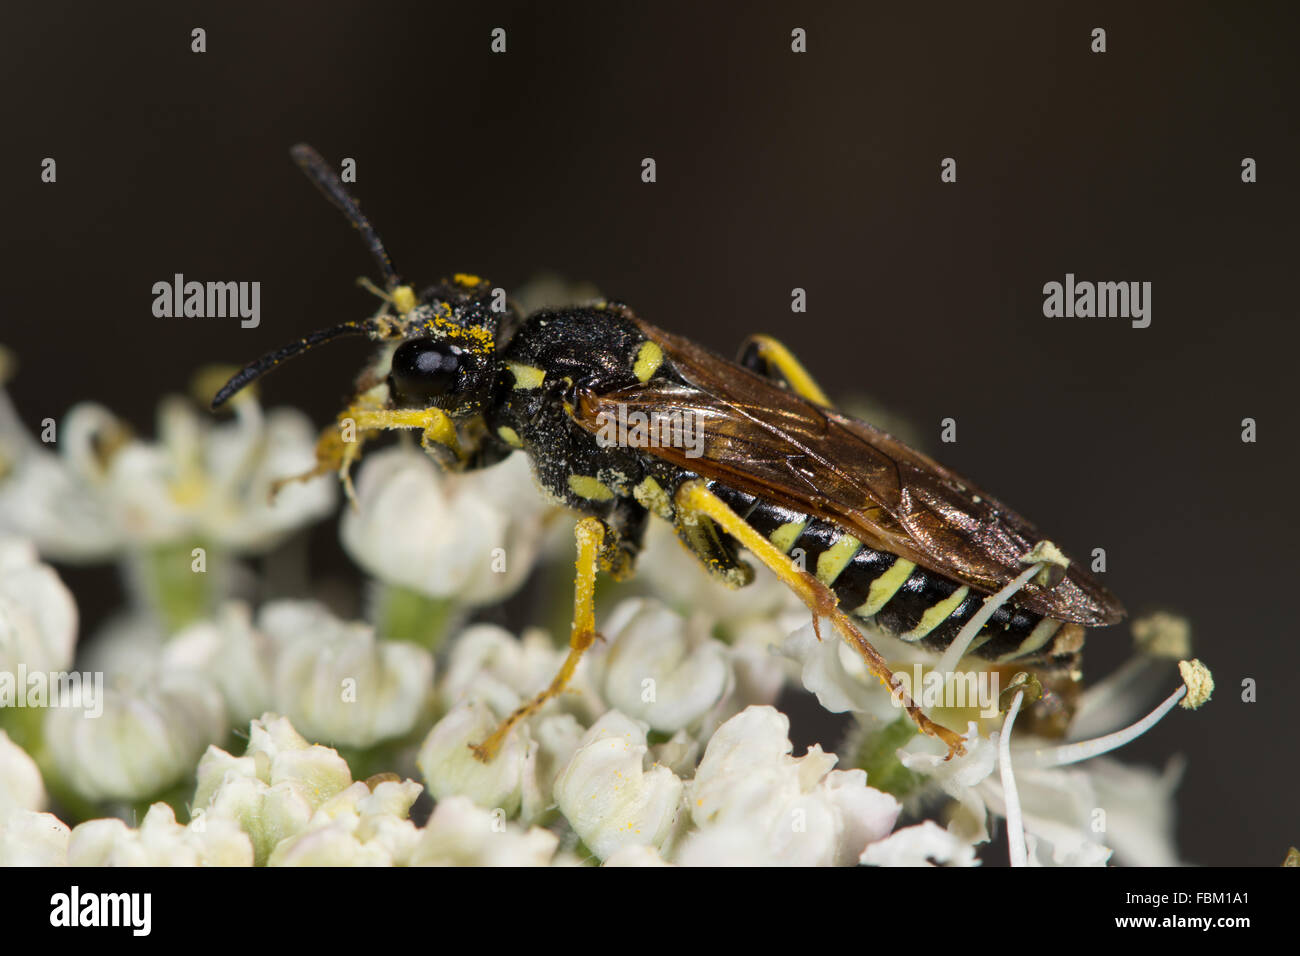 pollen-covered yellow-and-black striped sawfly (Tenthredinidae) on umbellifer flowers Stock Photo